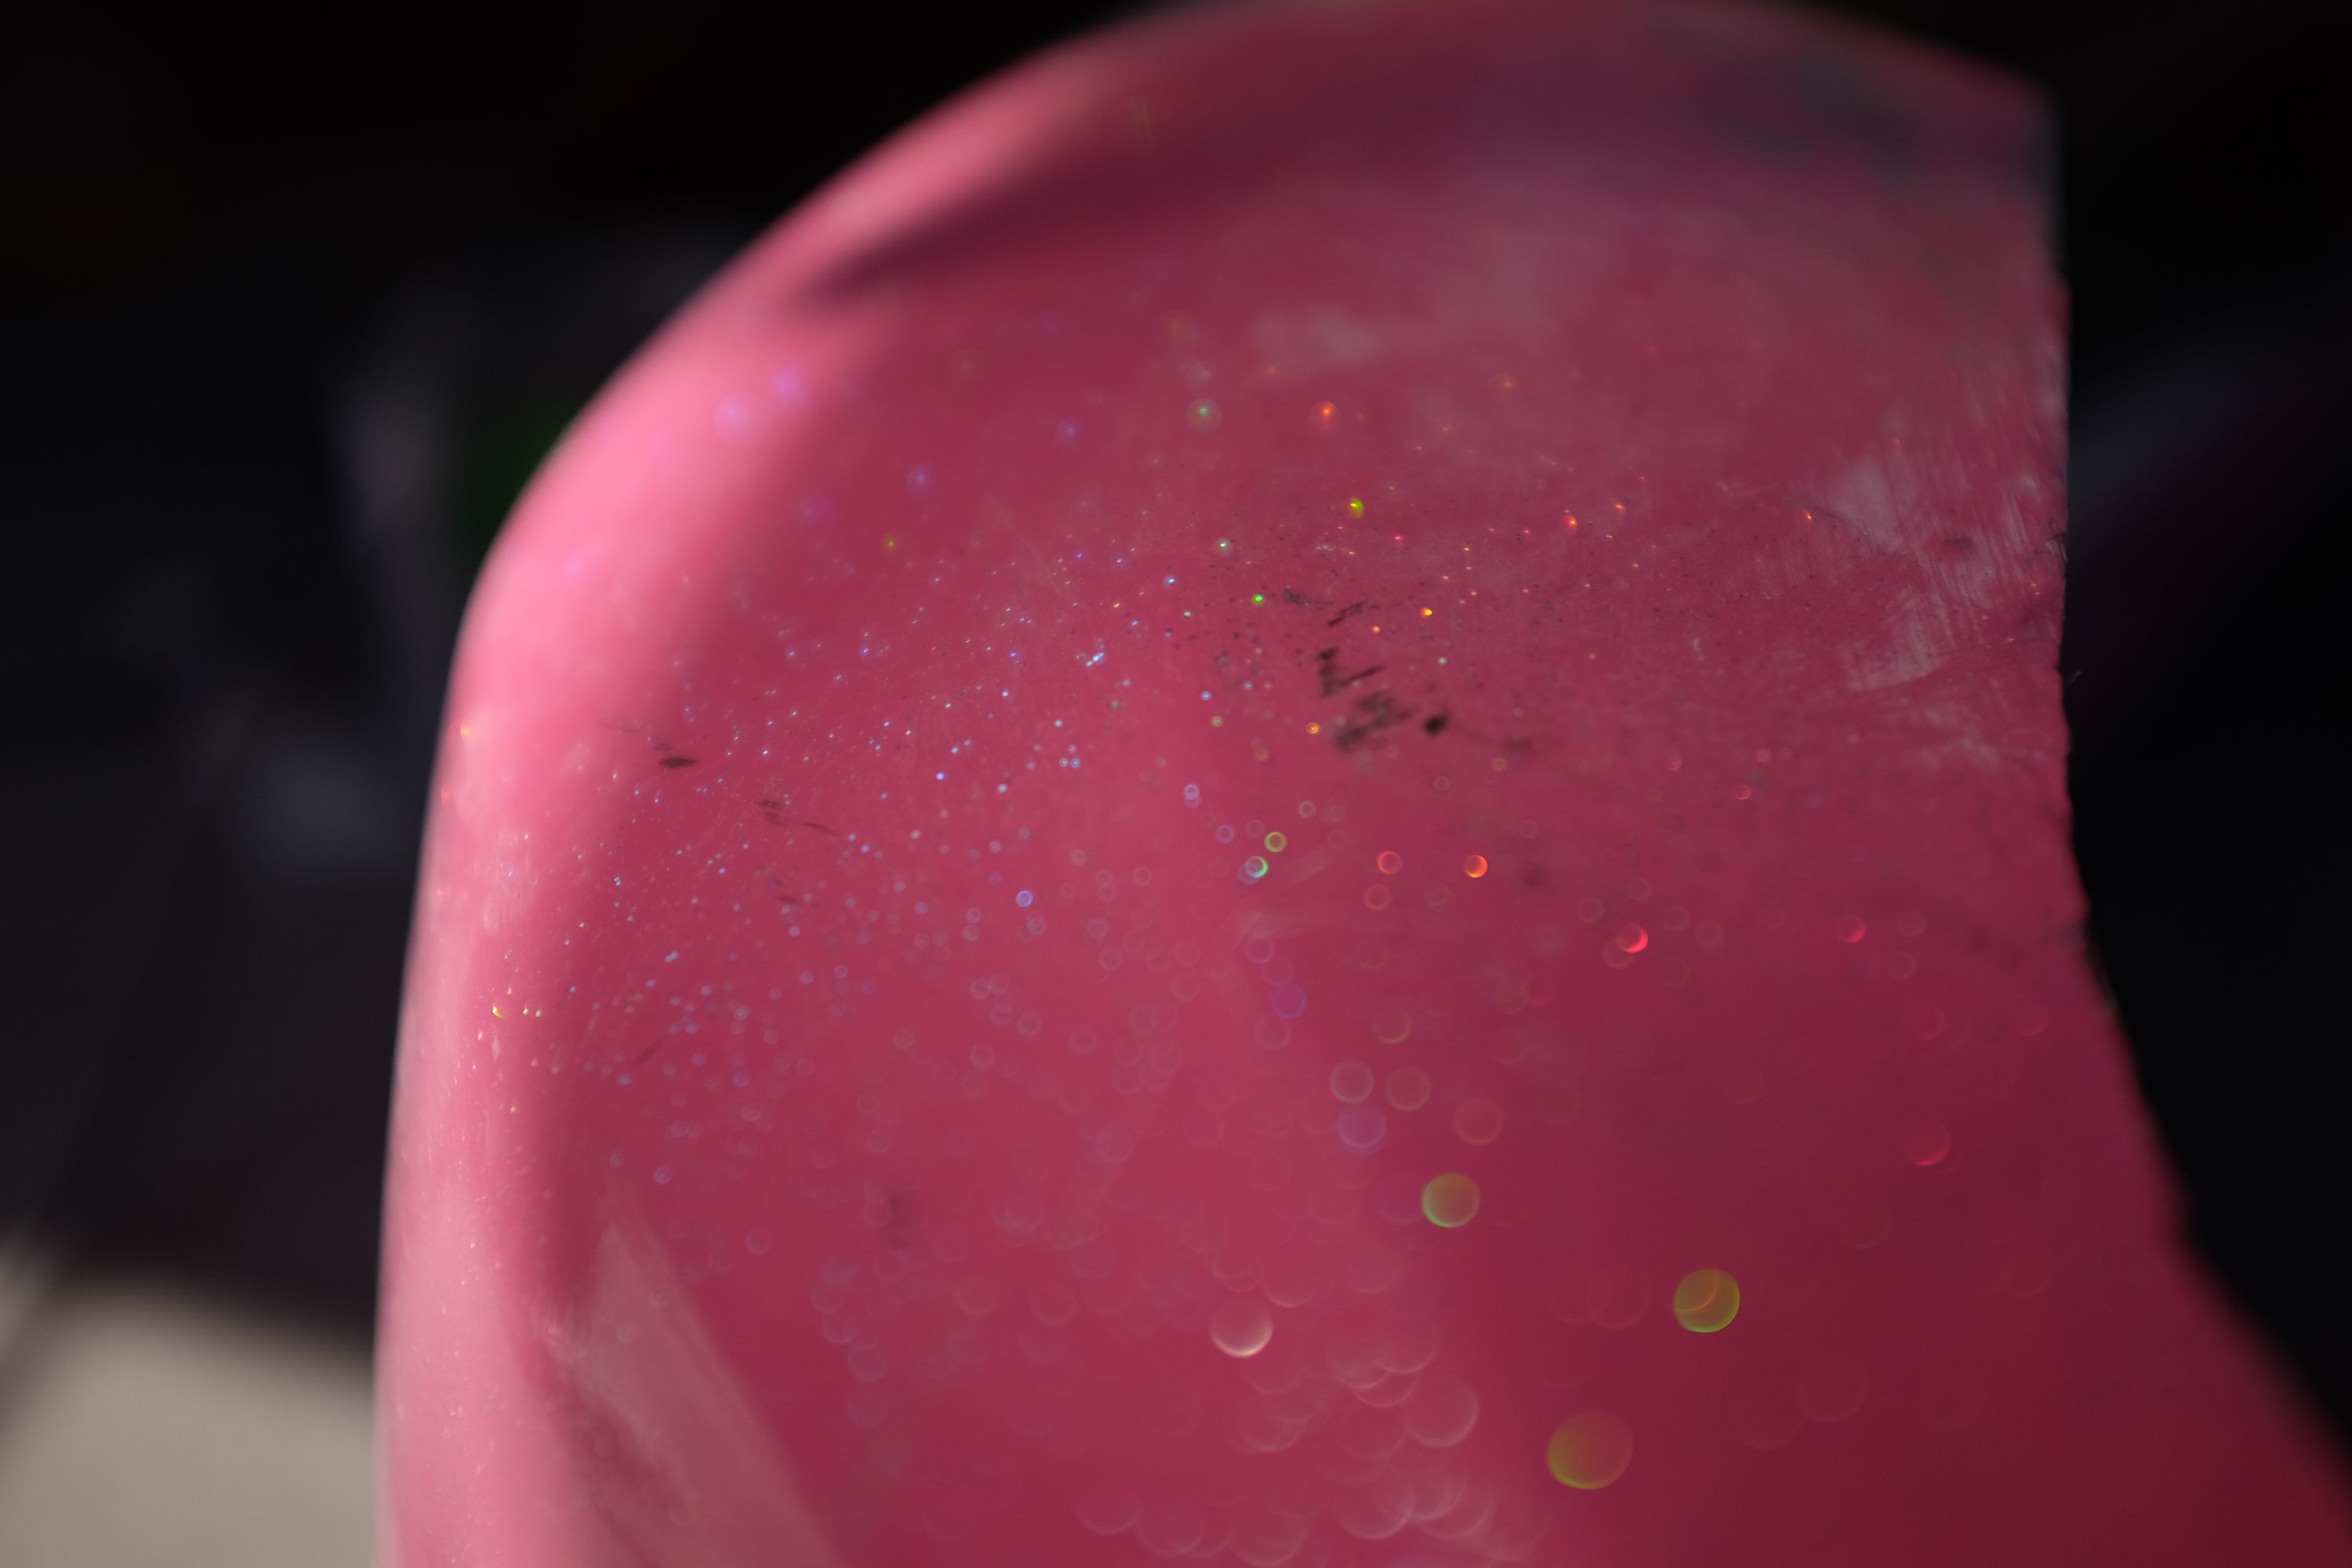 Closeup of a body panel of the Skyline, painted bubble gum pink mixed with glitter.